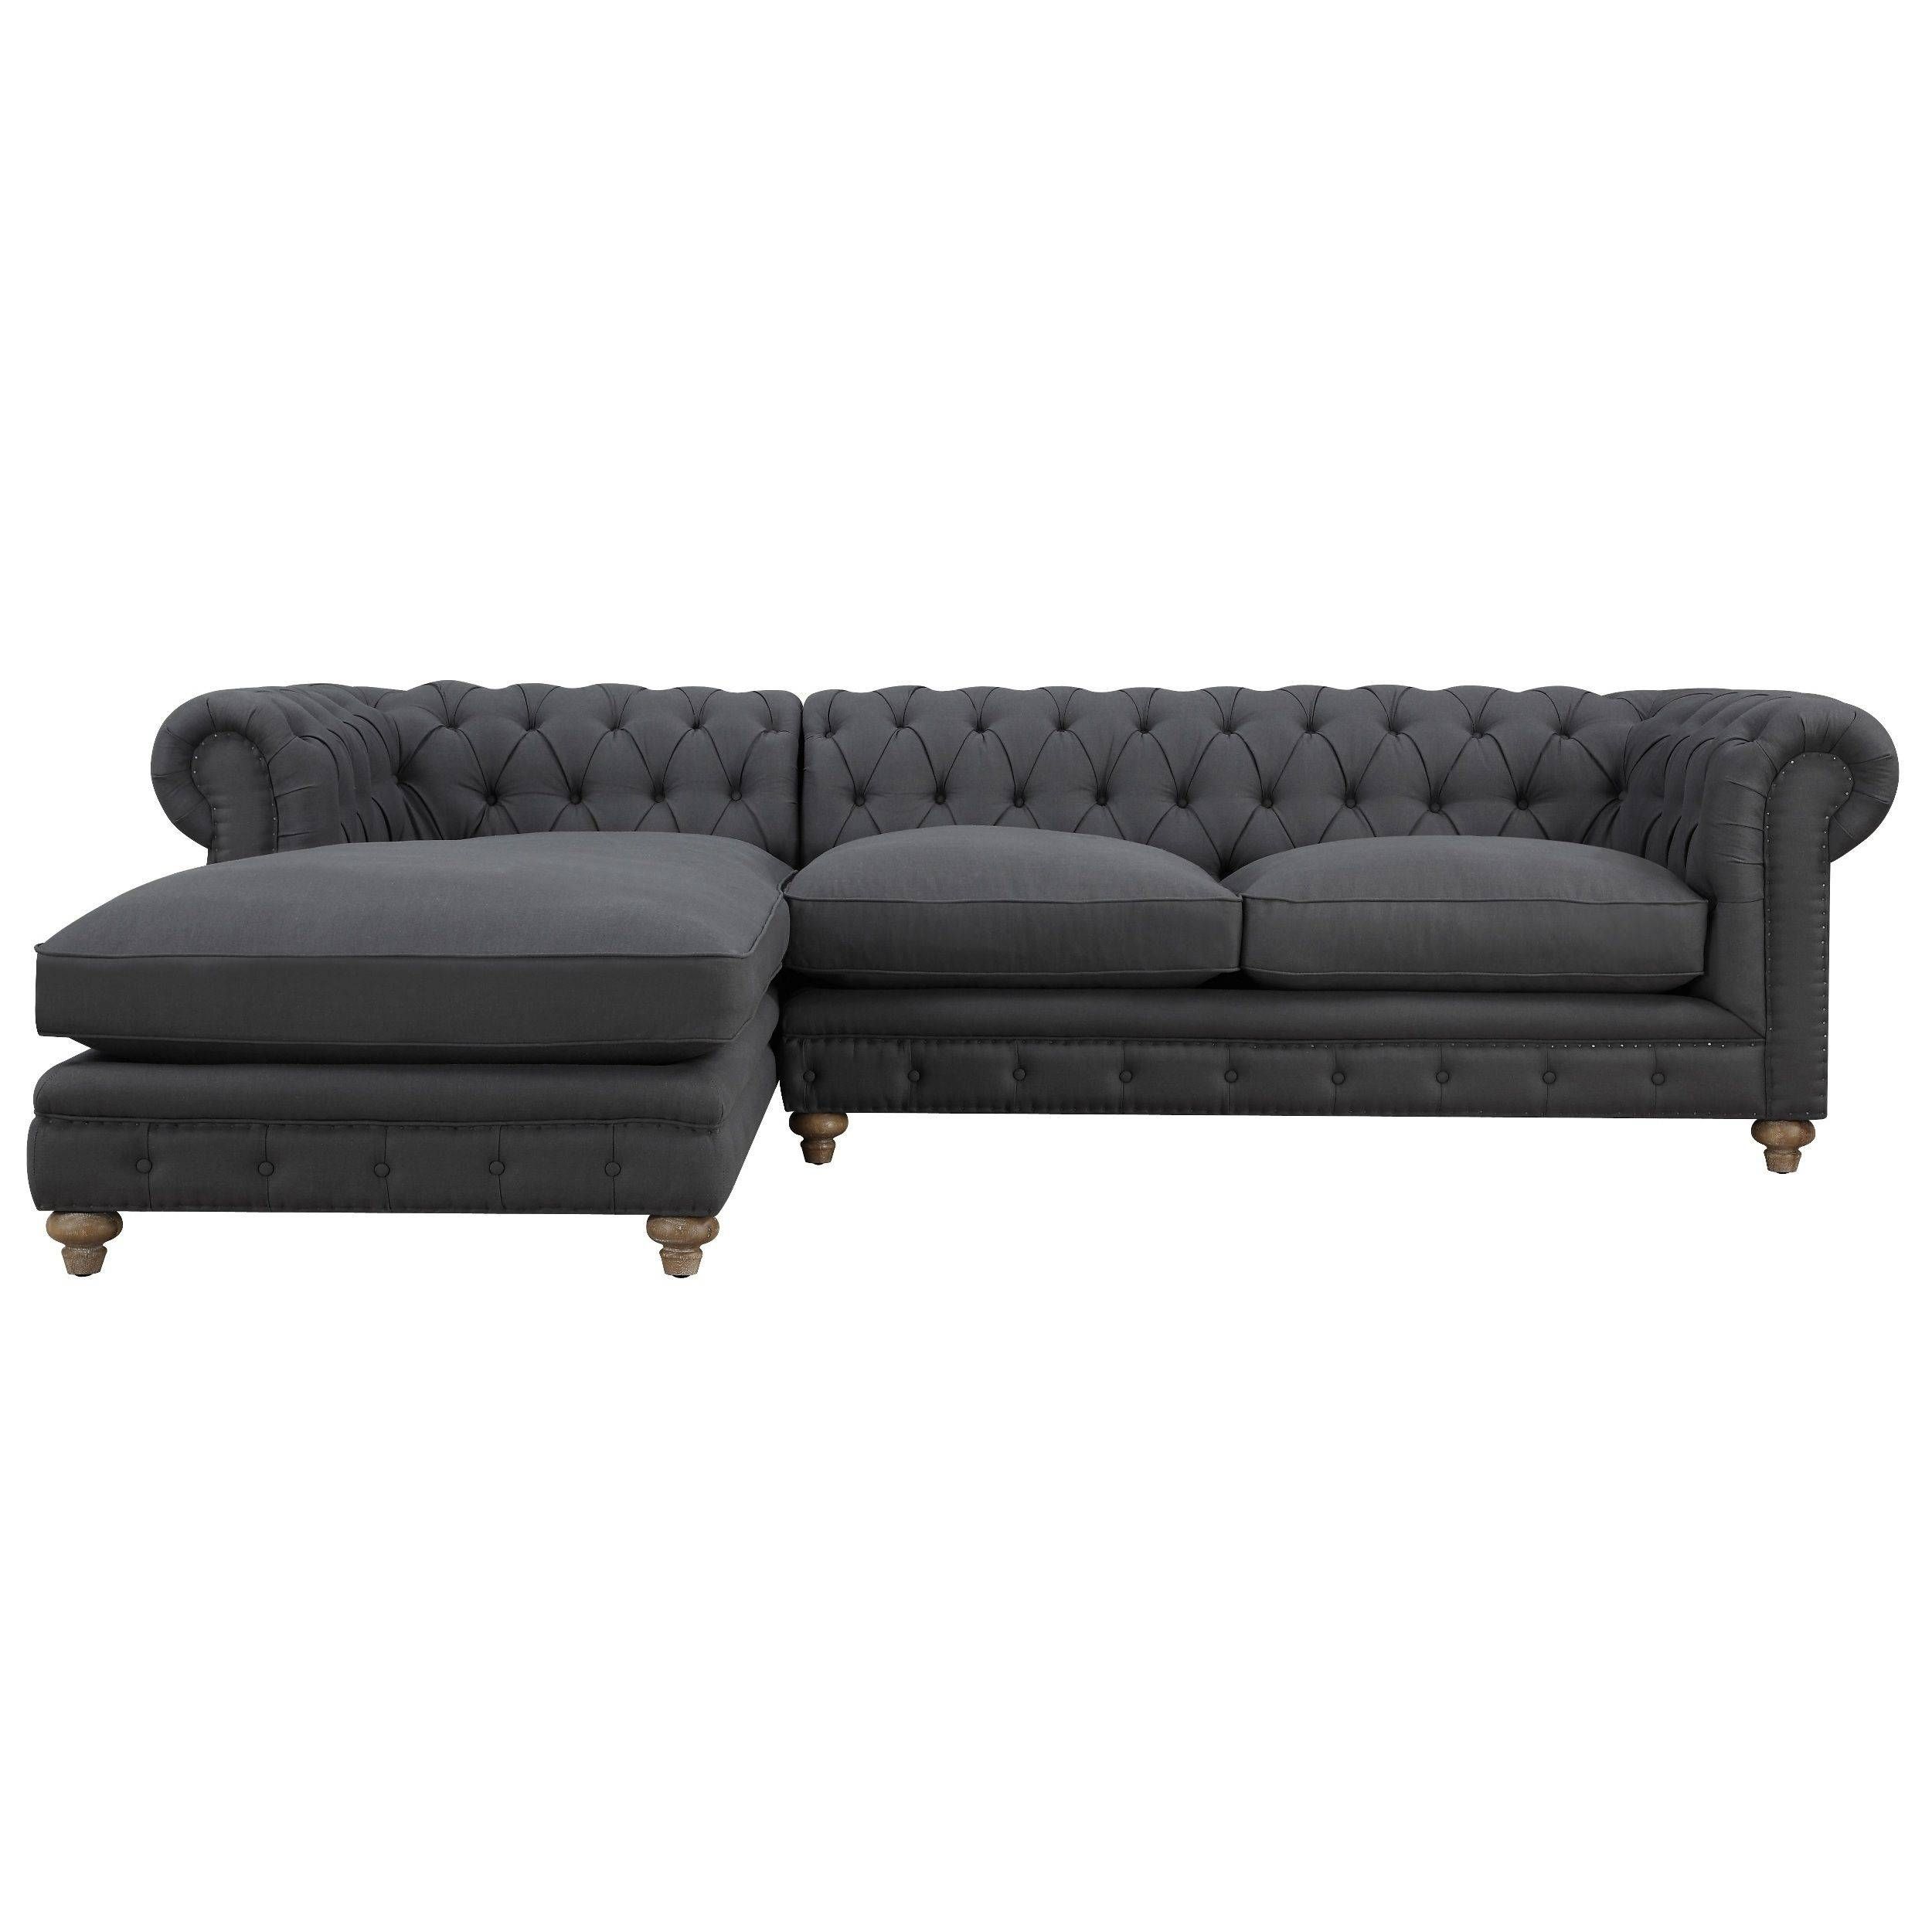 Sofa: Comfort And Style Is Evident In This Dynamic With Tufted Throughout Sofas And Sectionals (View 20 of 30)